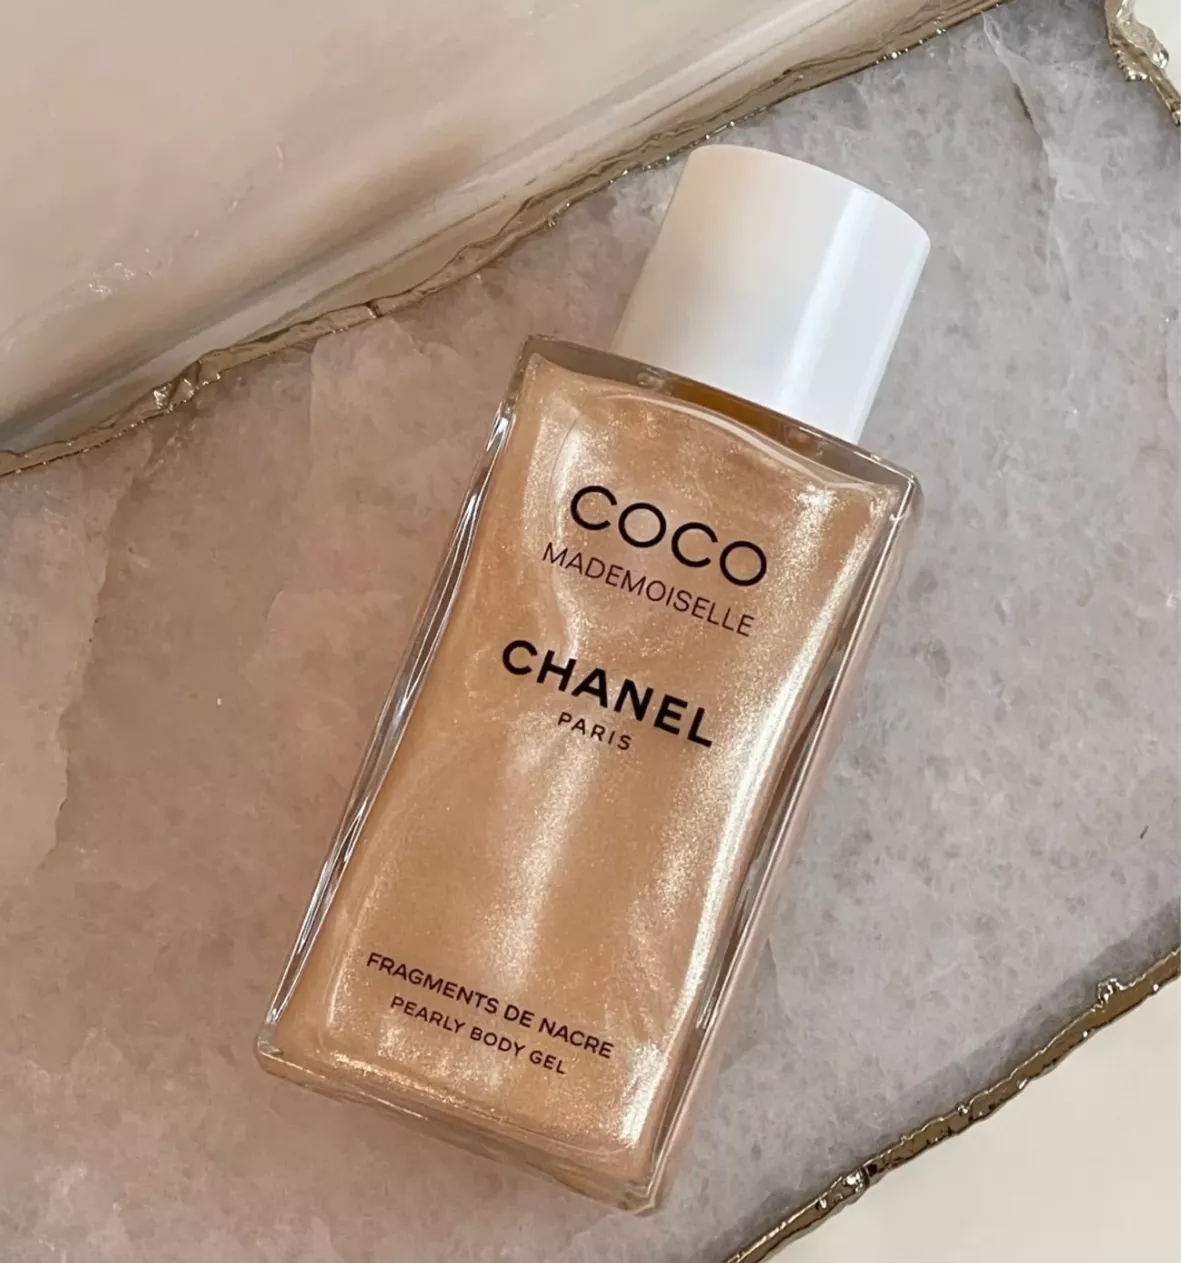 CHANEL Coco Mademoiselle Pearly Body Gel  Body gel, Coco mademoiselle, Coco  chanel